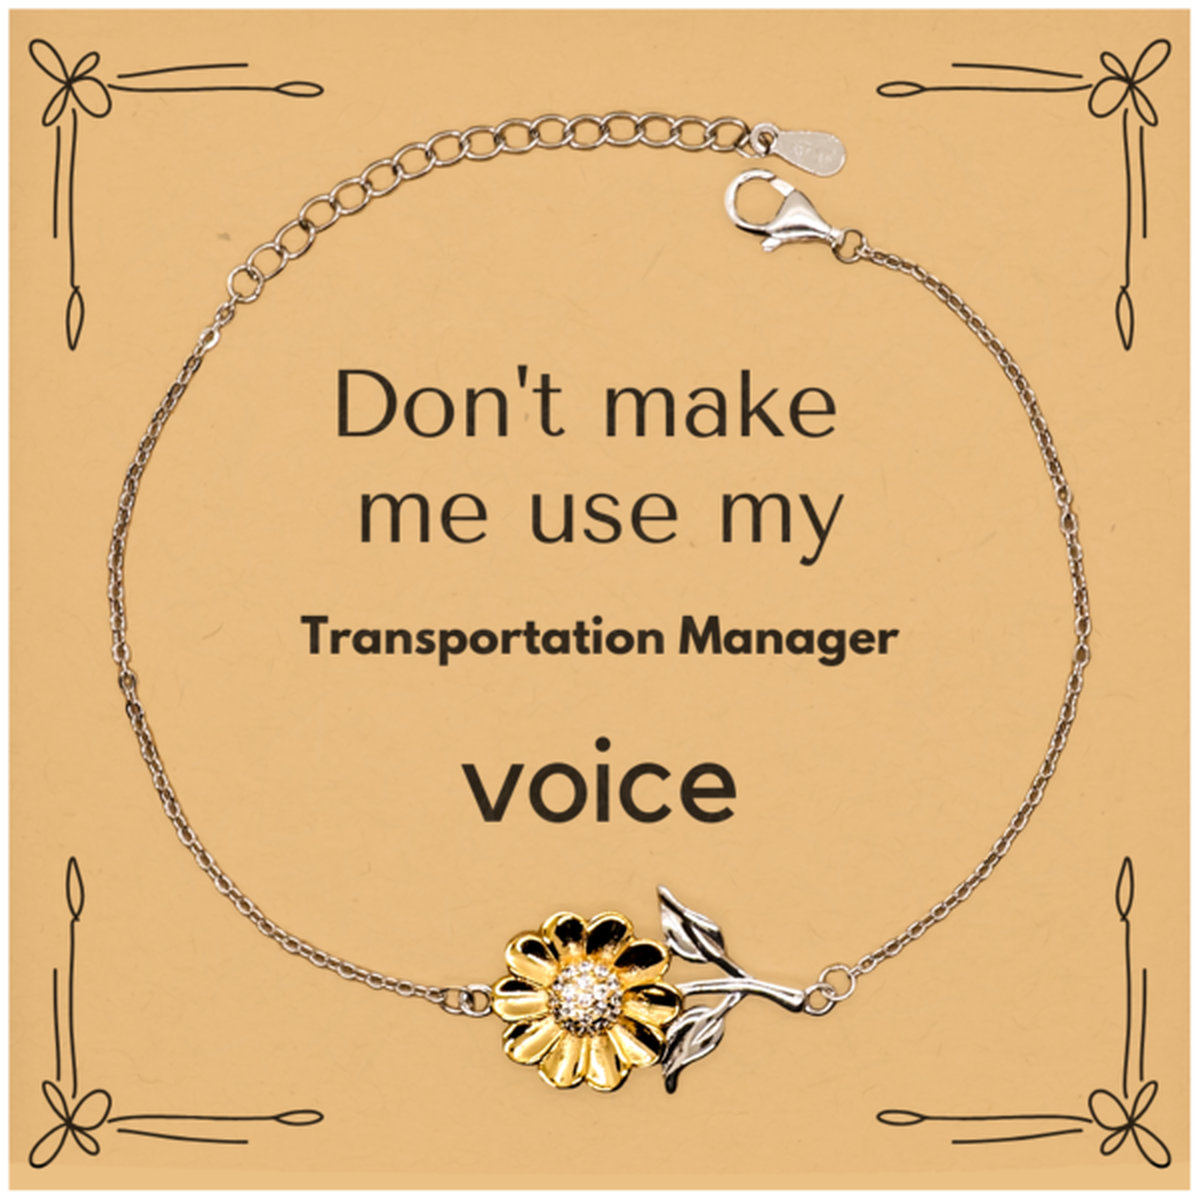 Don't make me use my Transportation Manager voice, Sarcasm Transportation Manager Card Gifts, Christmas Transportation Manager Sunflower Bracelet Birthday Unique Gifts For Transportation Manager Coworkers, Men, Women, Colleague, Friends